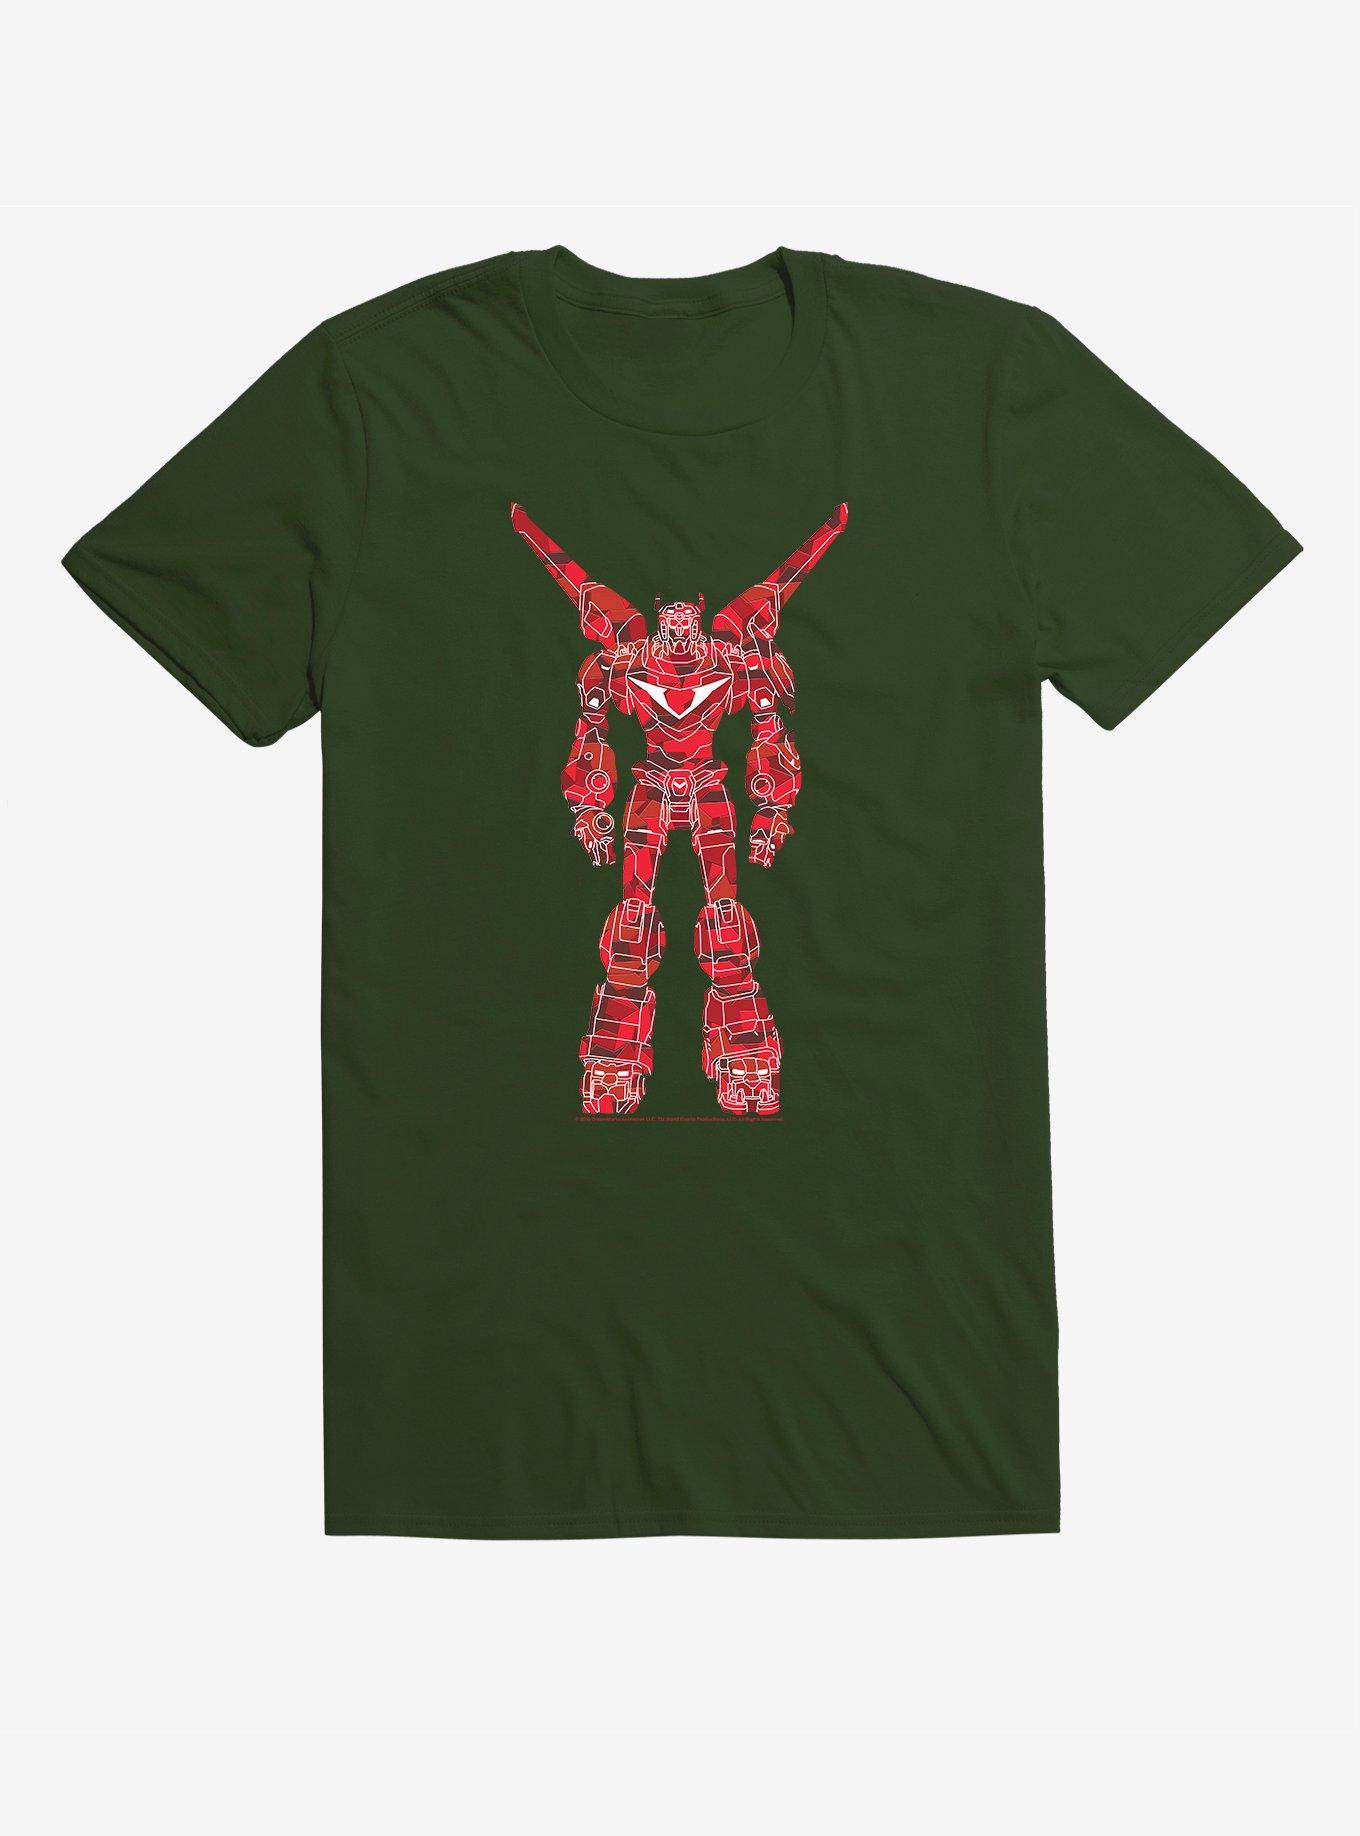 Voltron Red Patchy Robot T-Shirt, FOREST GREEN, hi-res